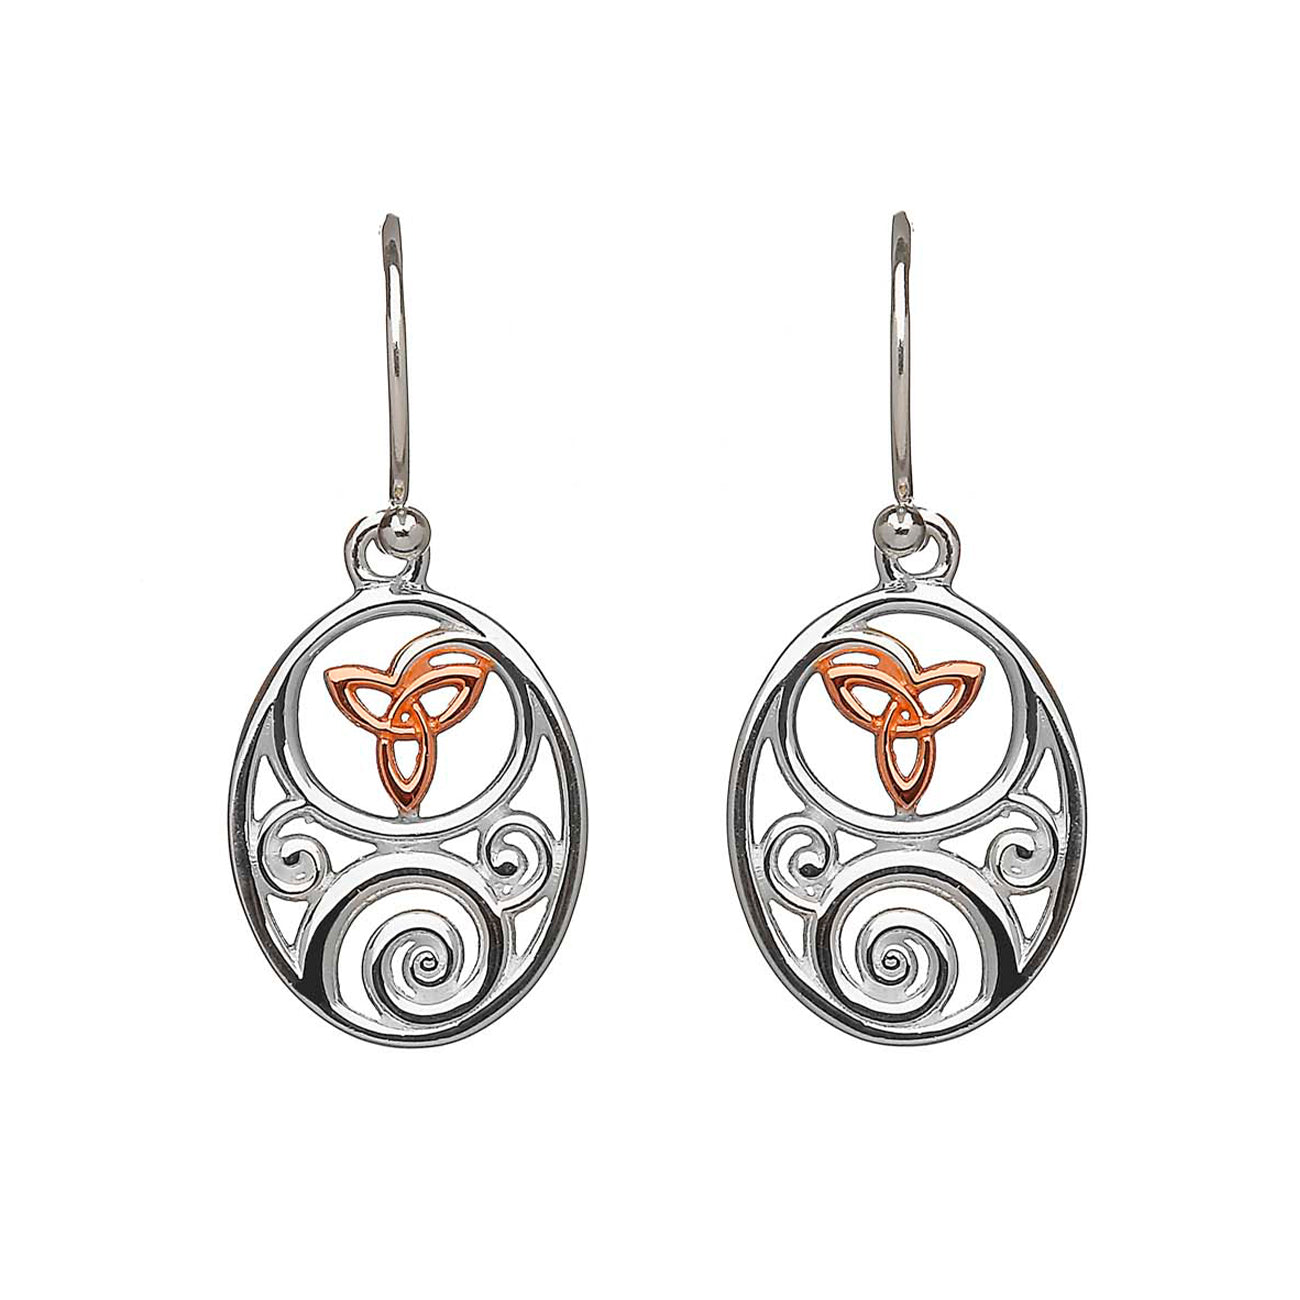 Sterling Silver and Rose Gold Celtic Trinity Knot Earrings